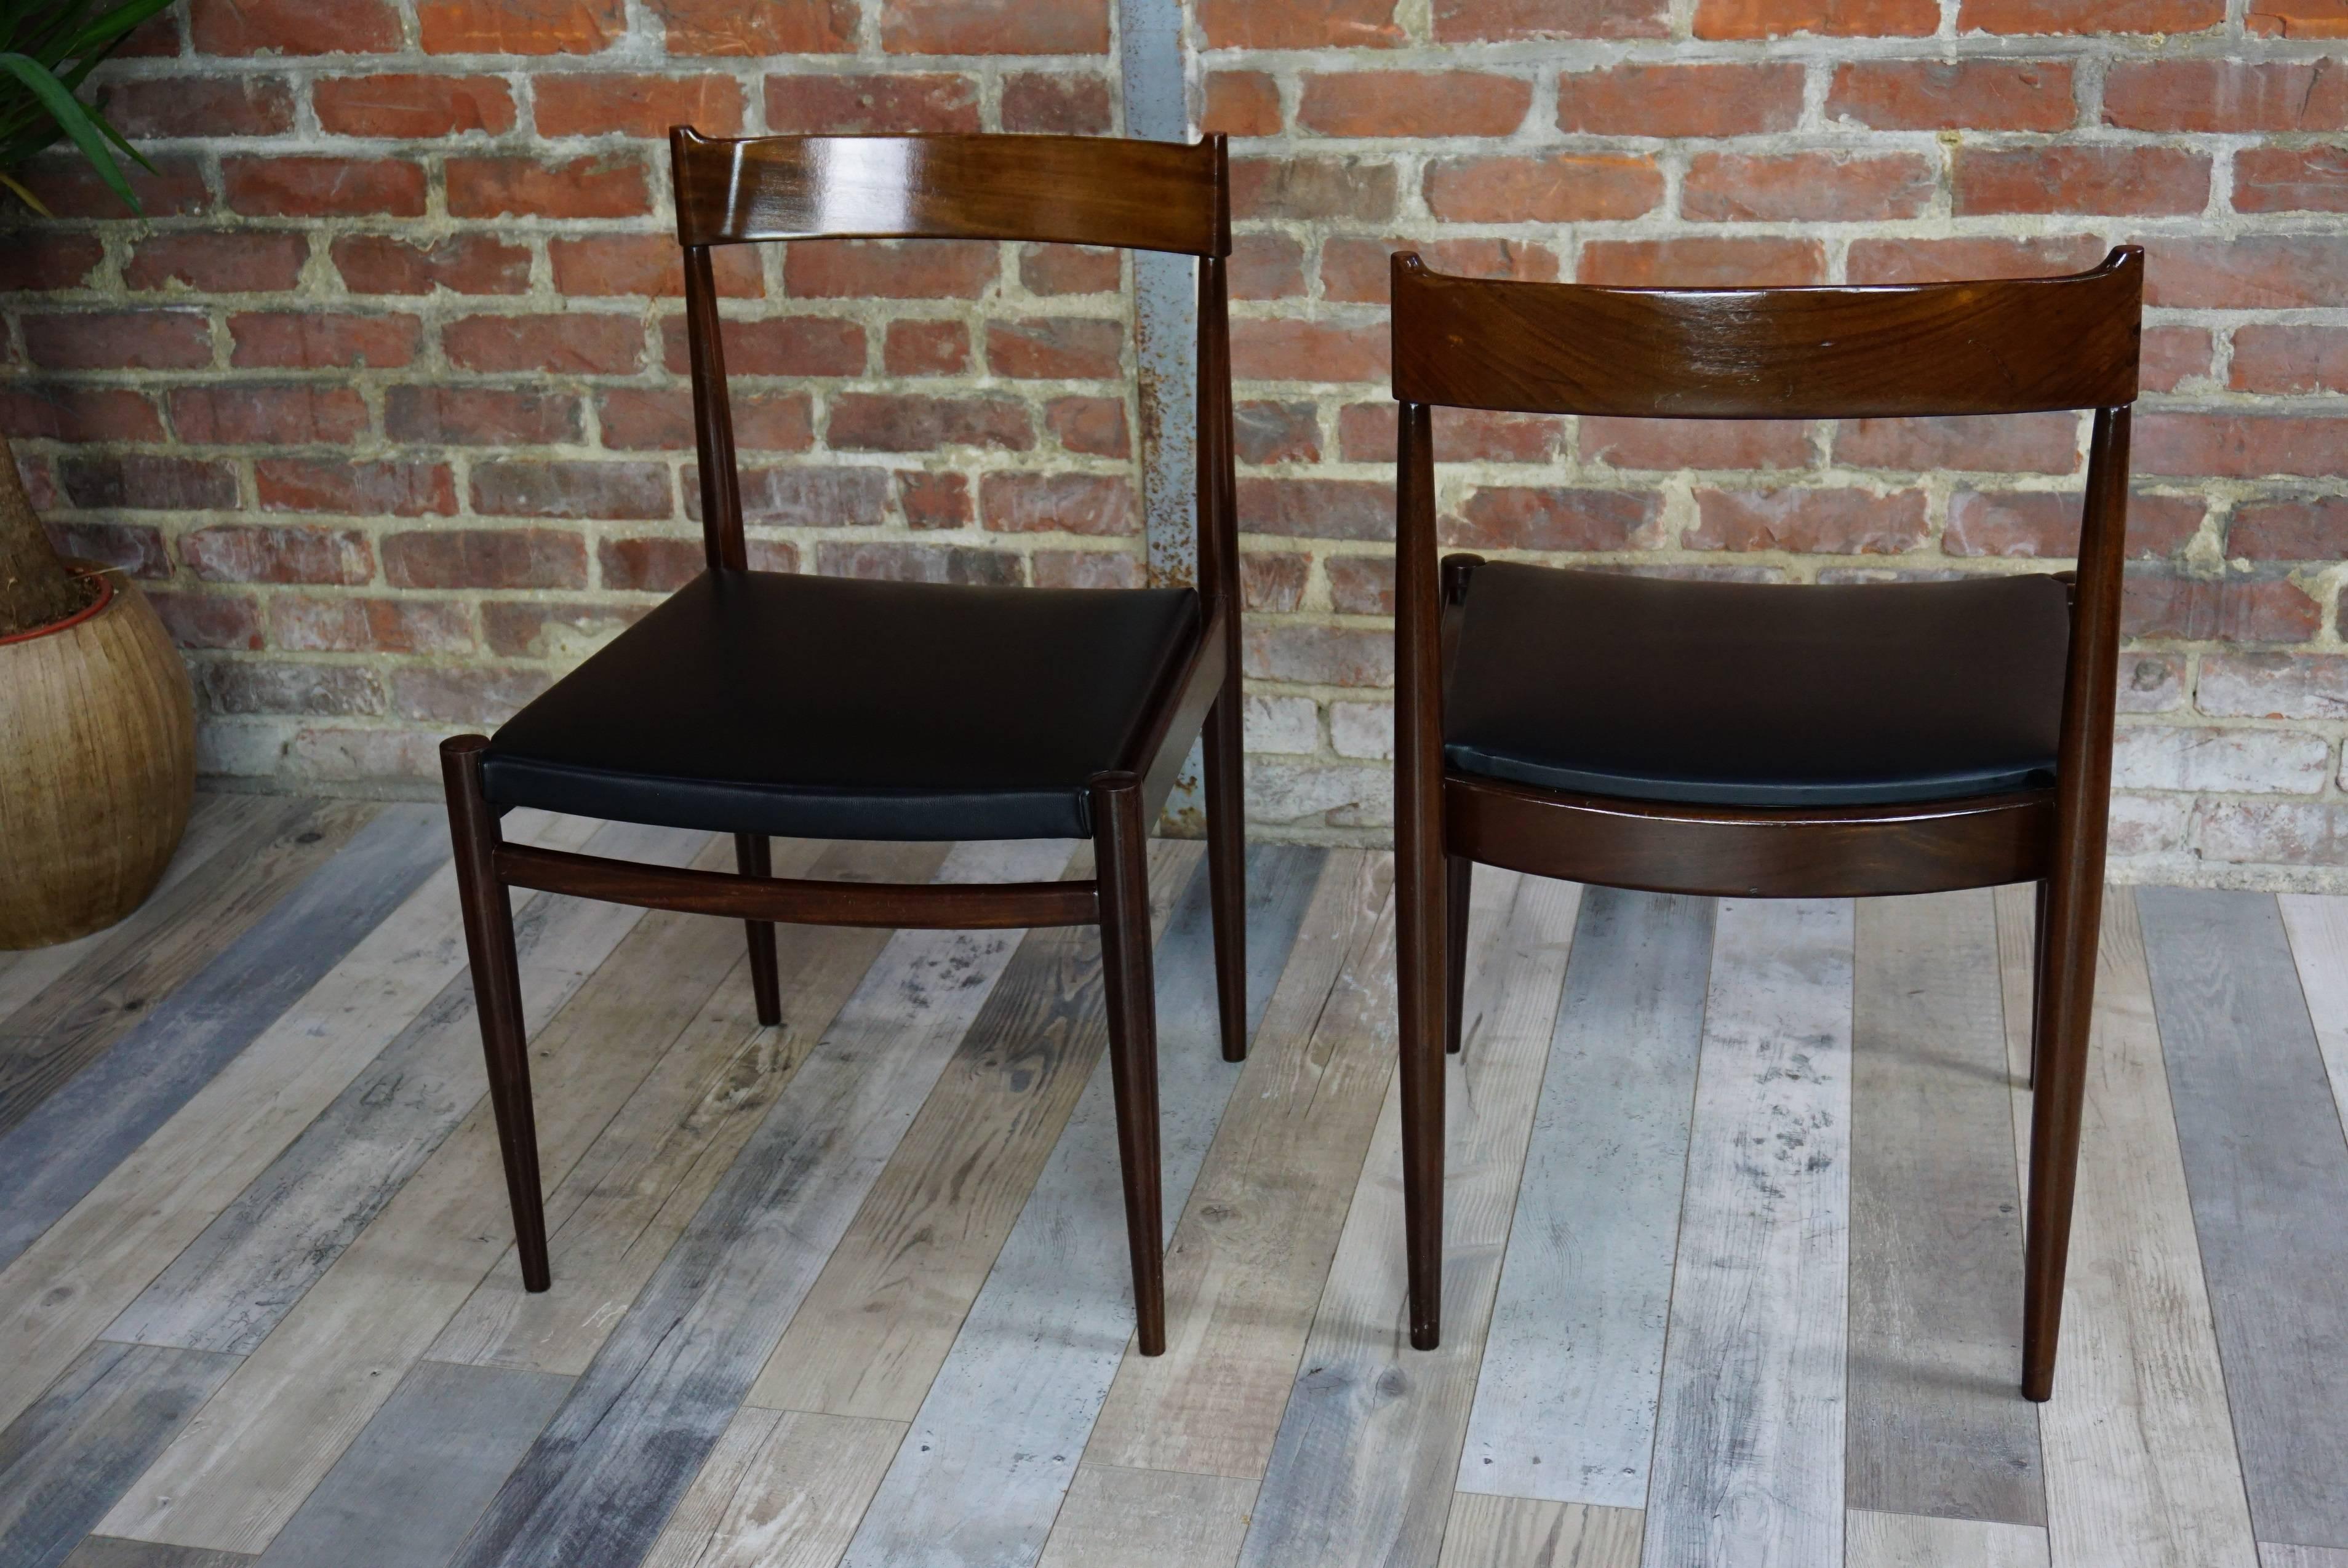 Pair of Teak Chairs and Faux Black Leather Design from the 1950s 1